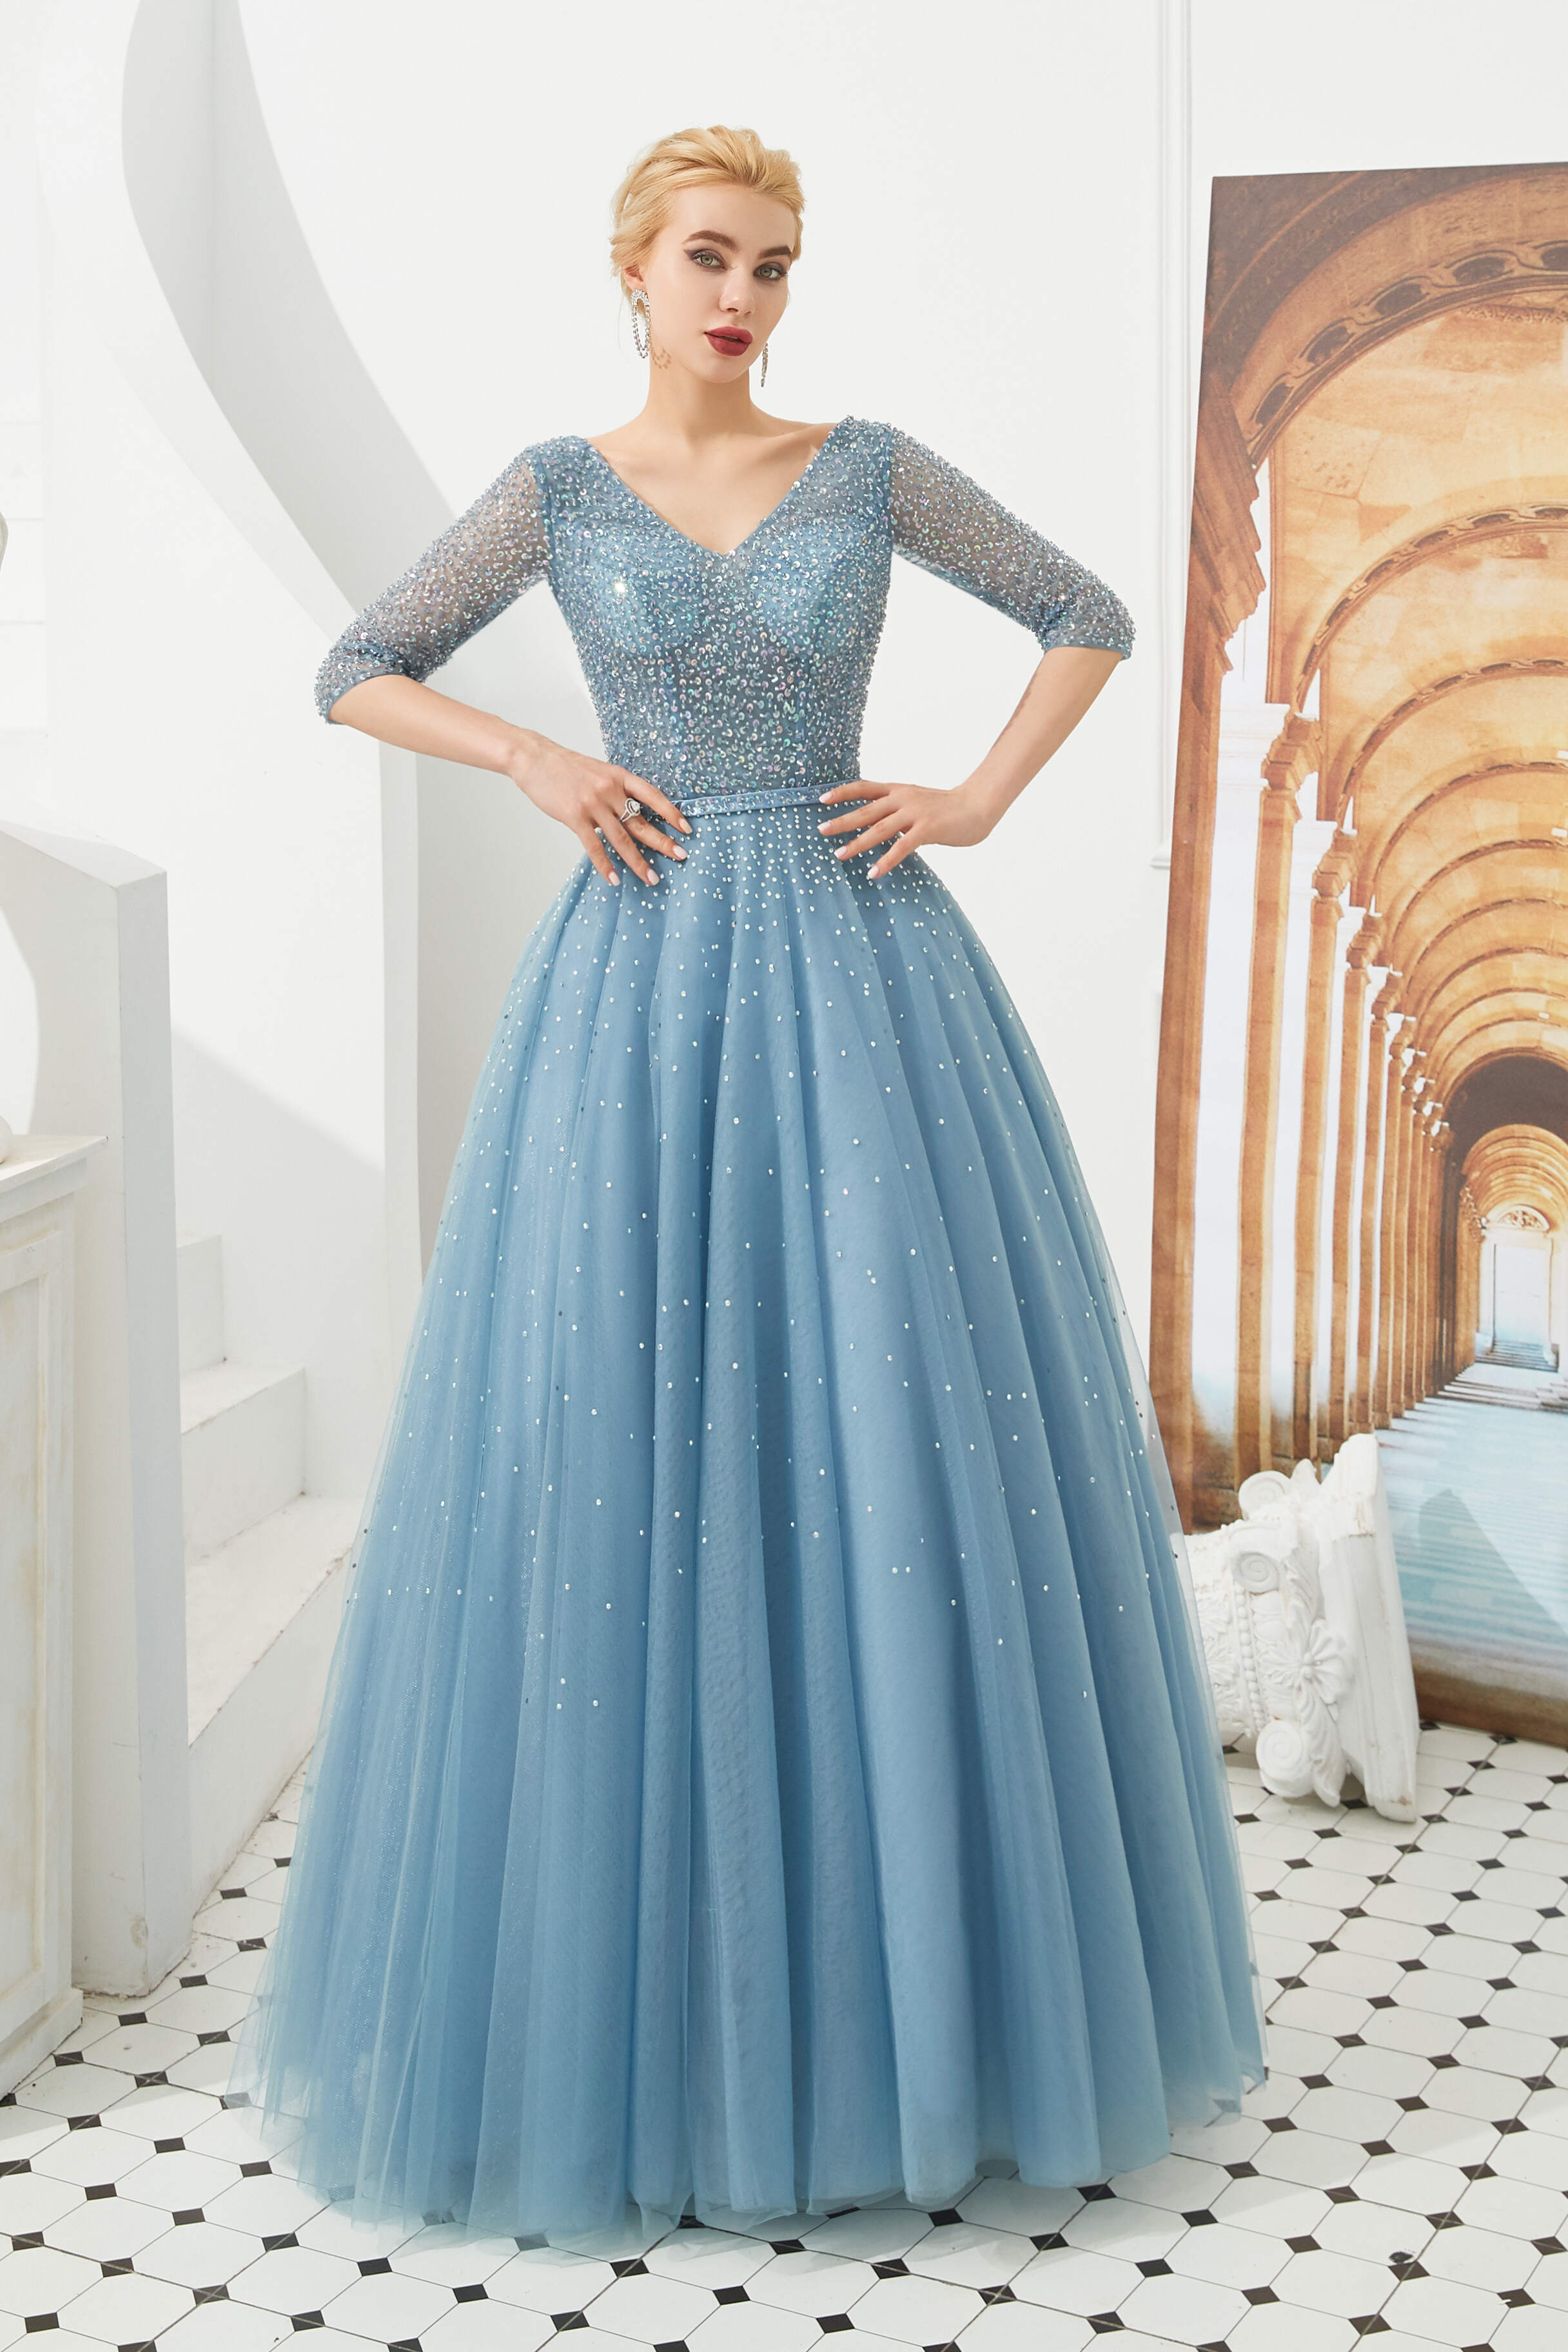 Dusty Blue V-Neck Half-Sleeve Corset Prom Dresses Long With Beadings Lace-up outfit, Prom Dress Websites